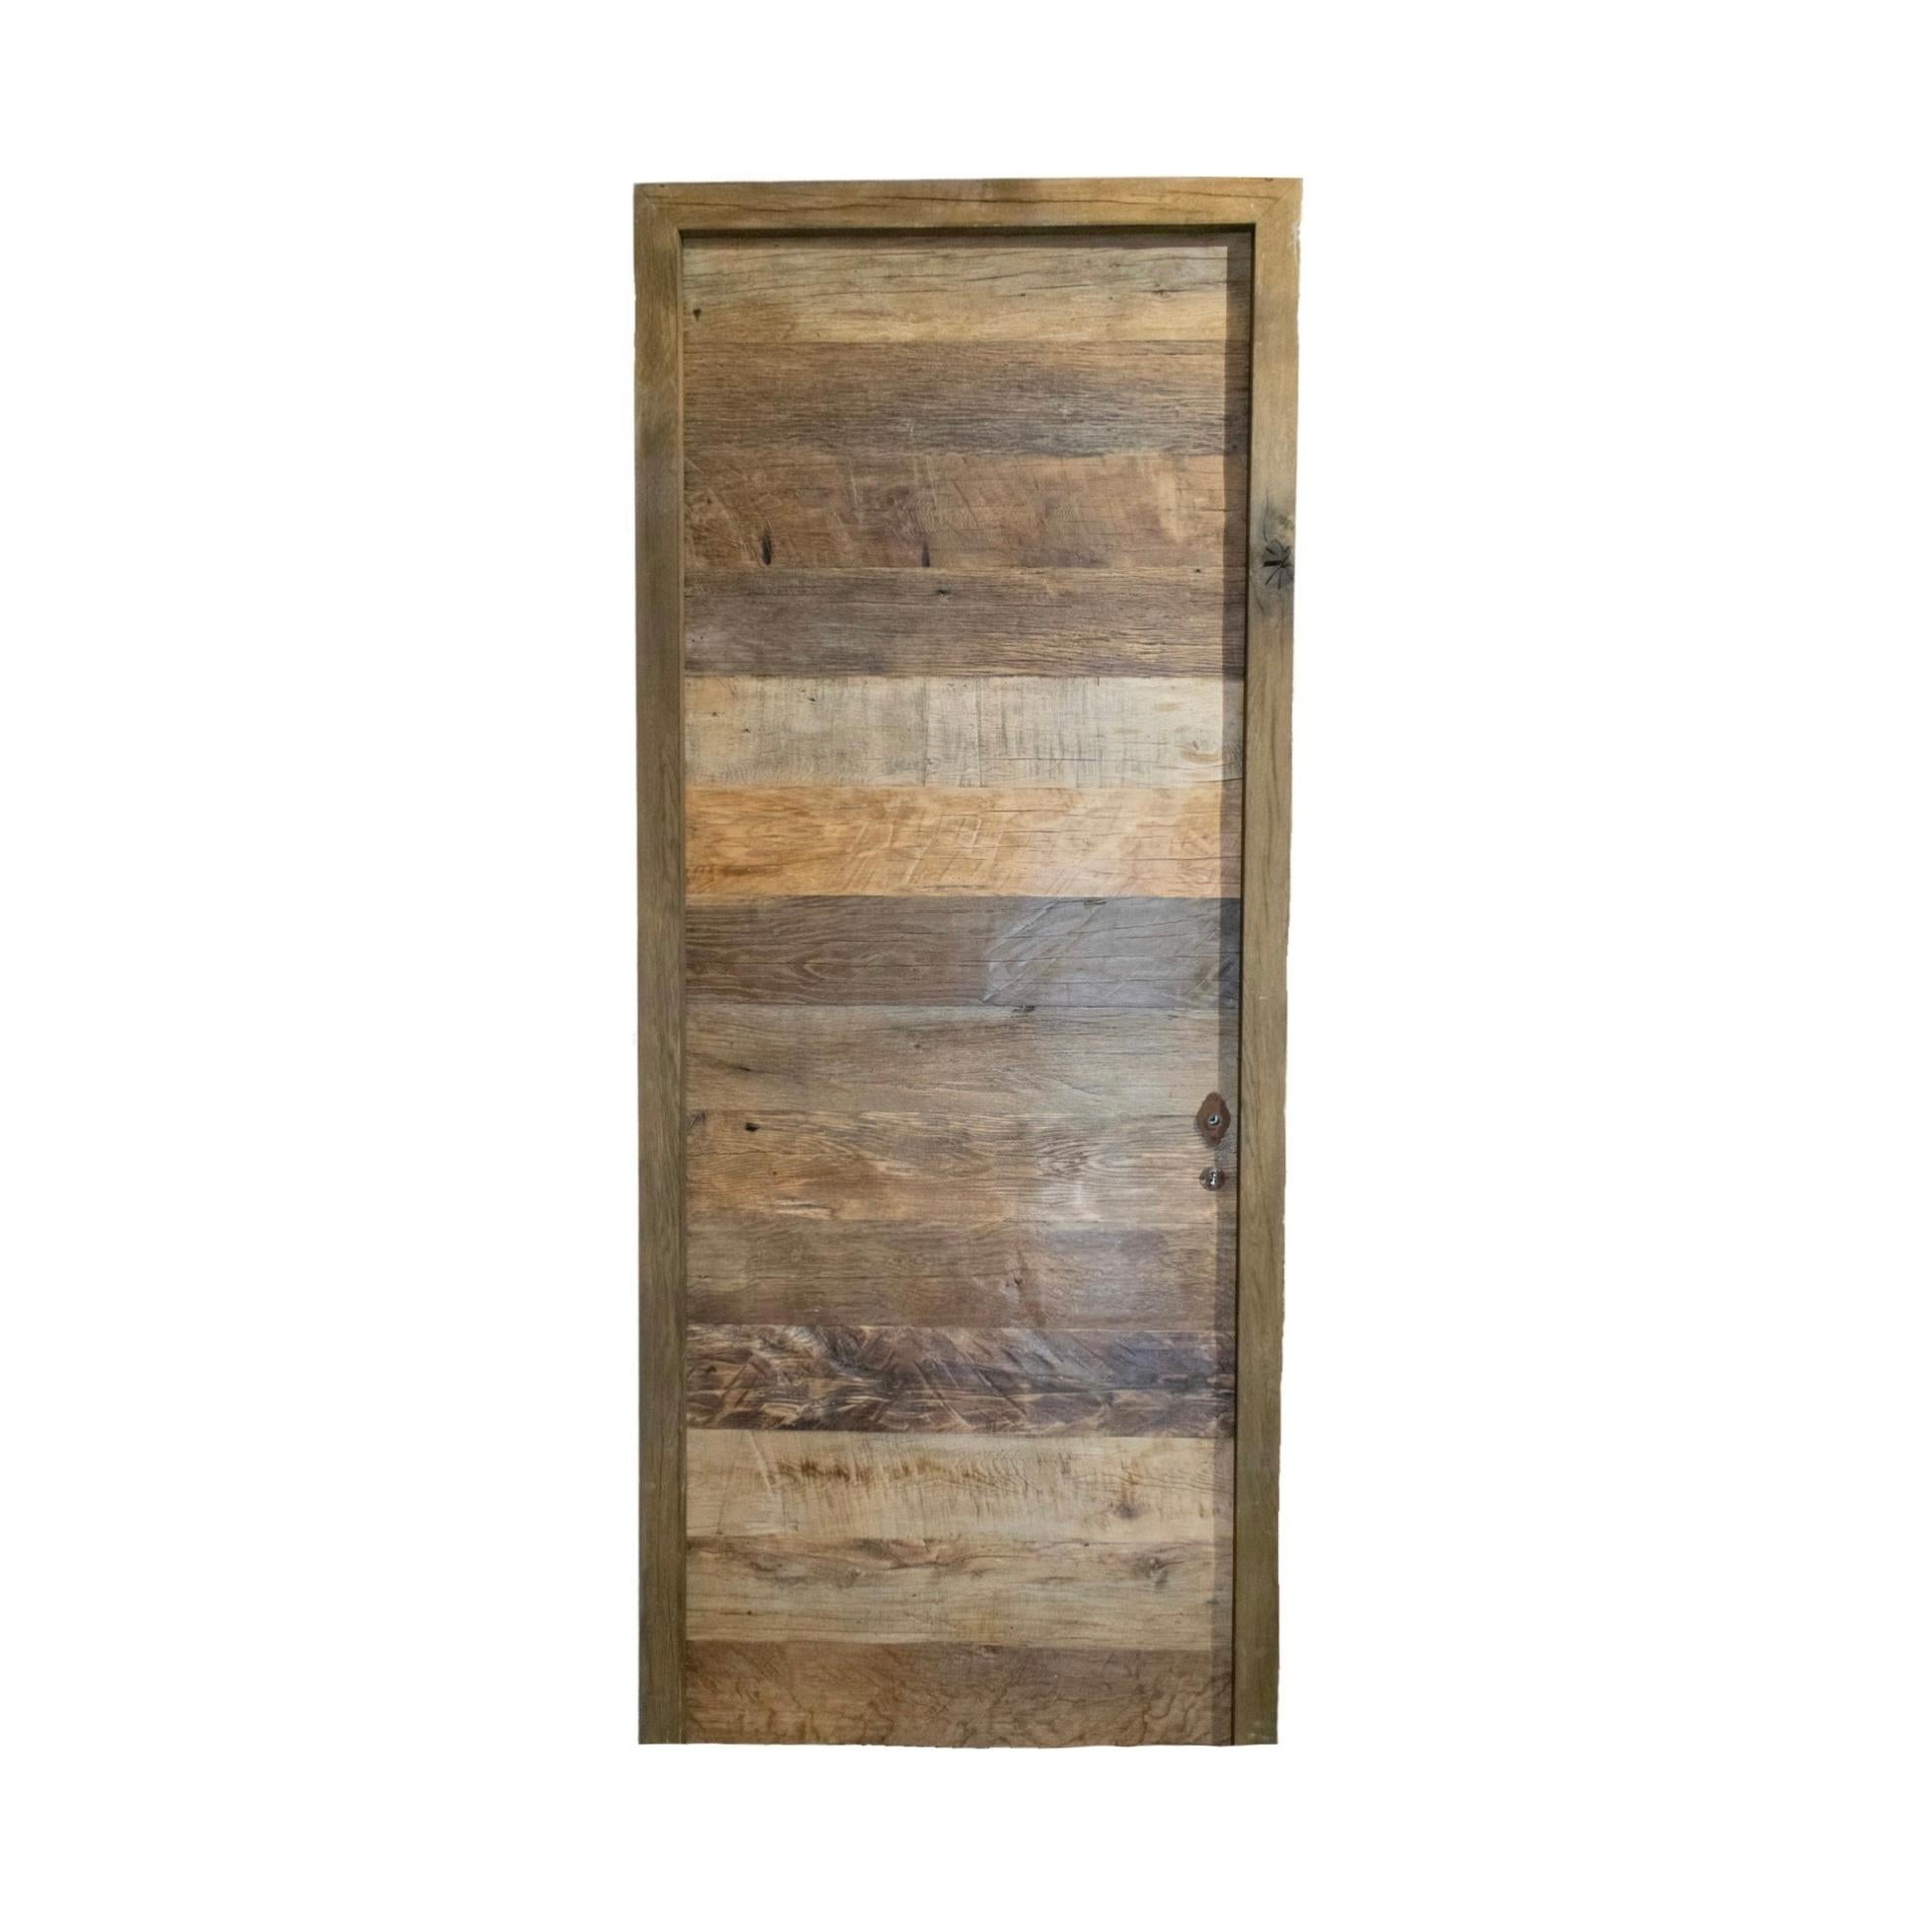 A reclaimed door made out of newly constructed Oakwood. Circa, 18th century. 

Reclaimed rustic doors are doors made from used materials that have been refurbished and given a new purpose. They often have a rustic or vintage appearance, with signs